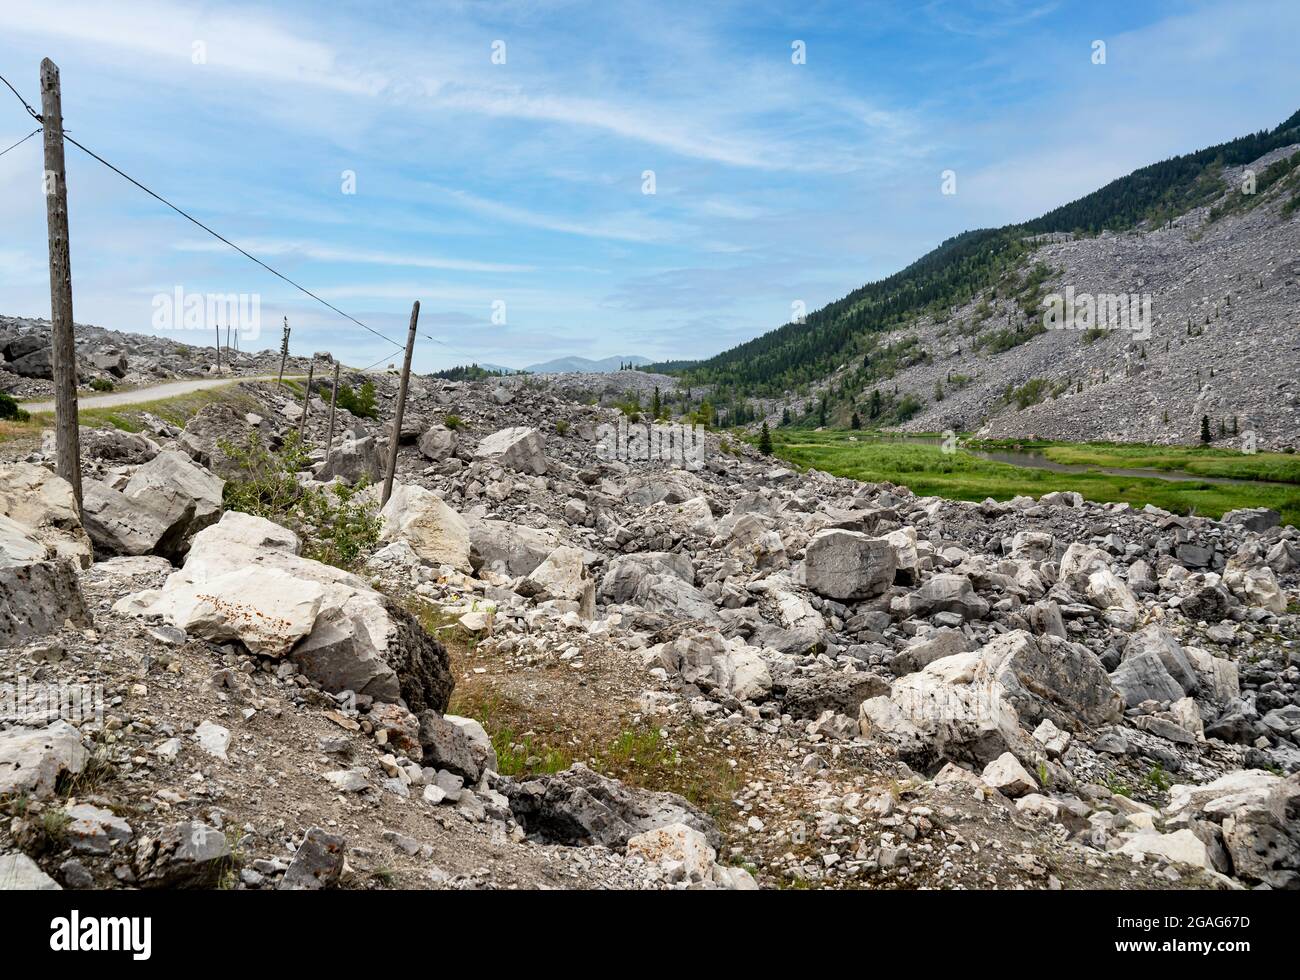 Rock avalanche natural disaster at the Frank slide in Alberta Canada. Stock Photo